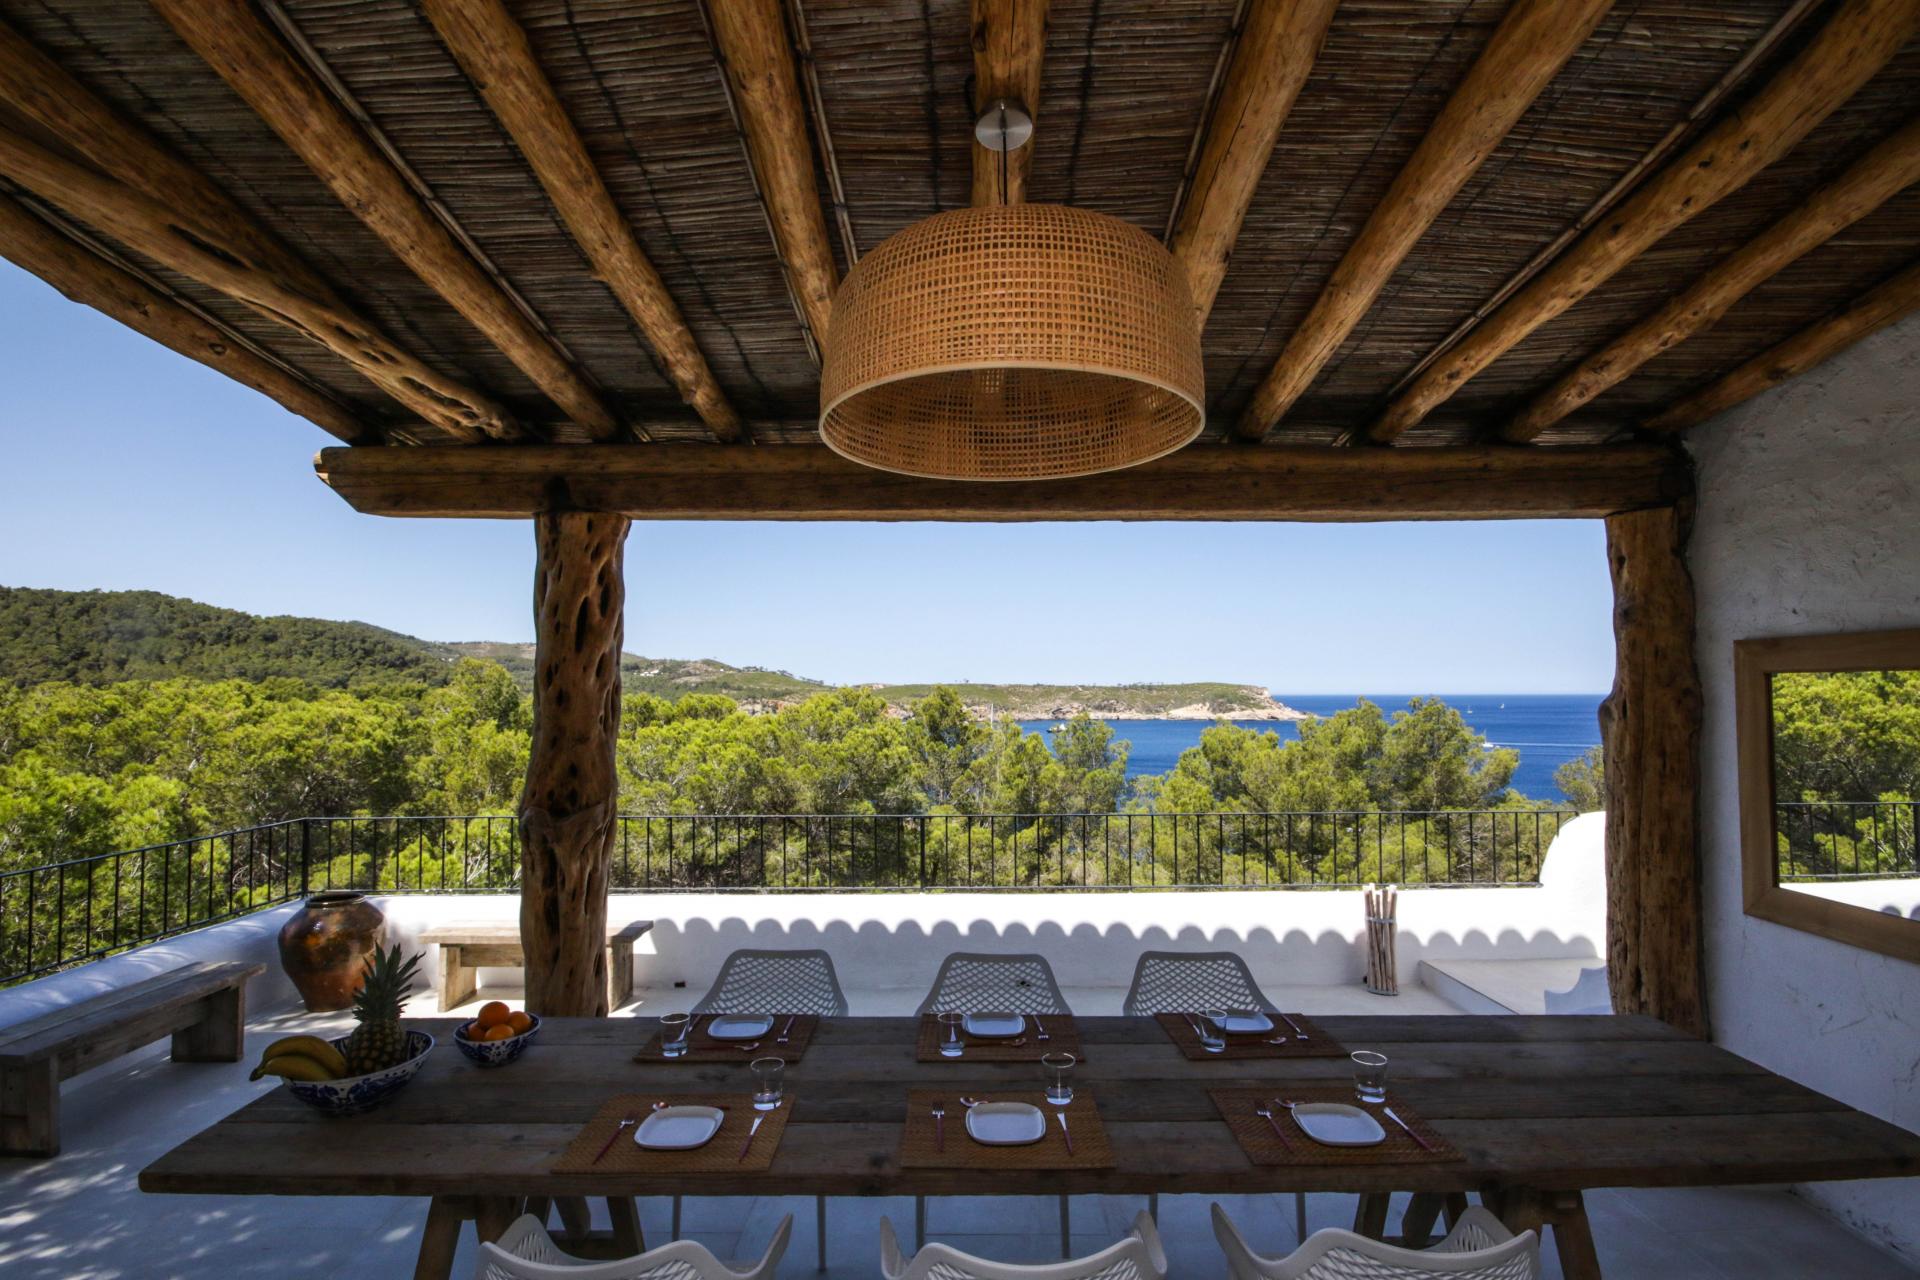 Cozy and romantic house in the north of Ibiza with splendid sunset view in Portinax